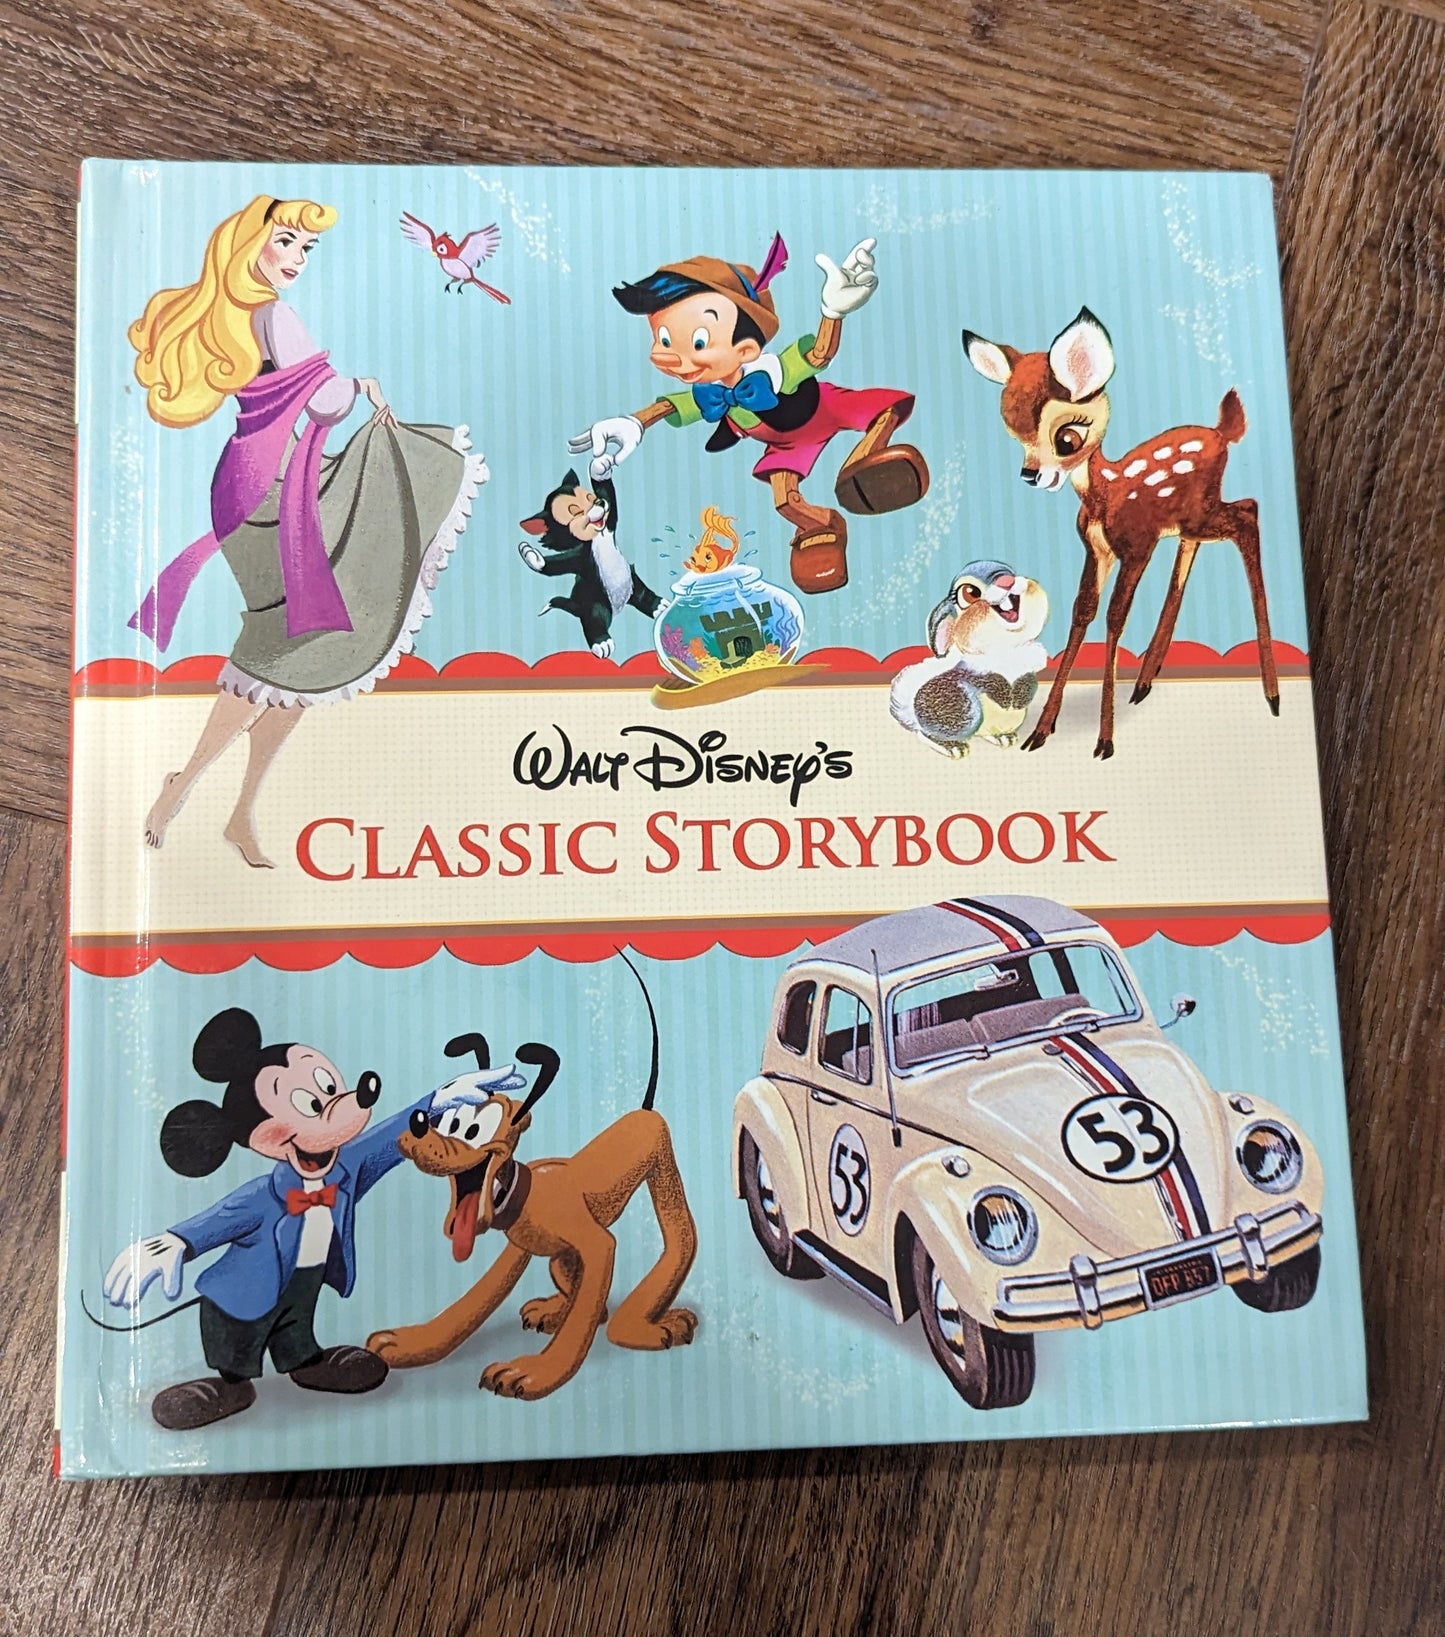 Disney Classic storybook collection